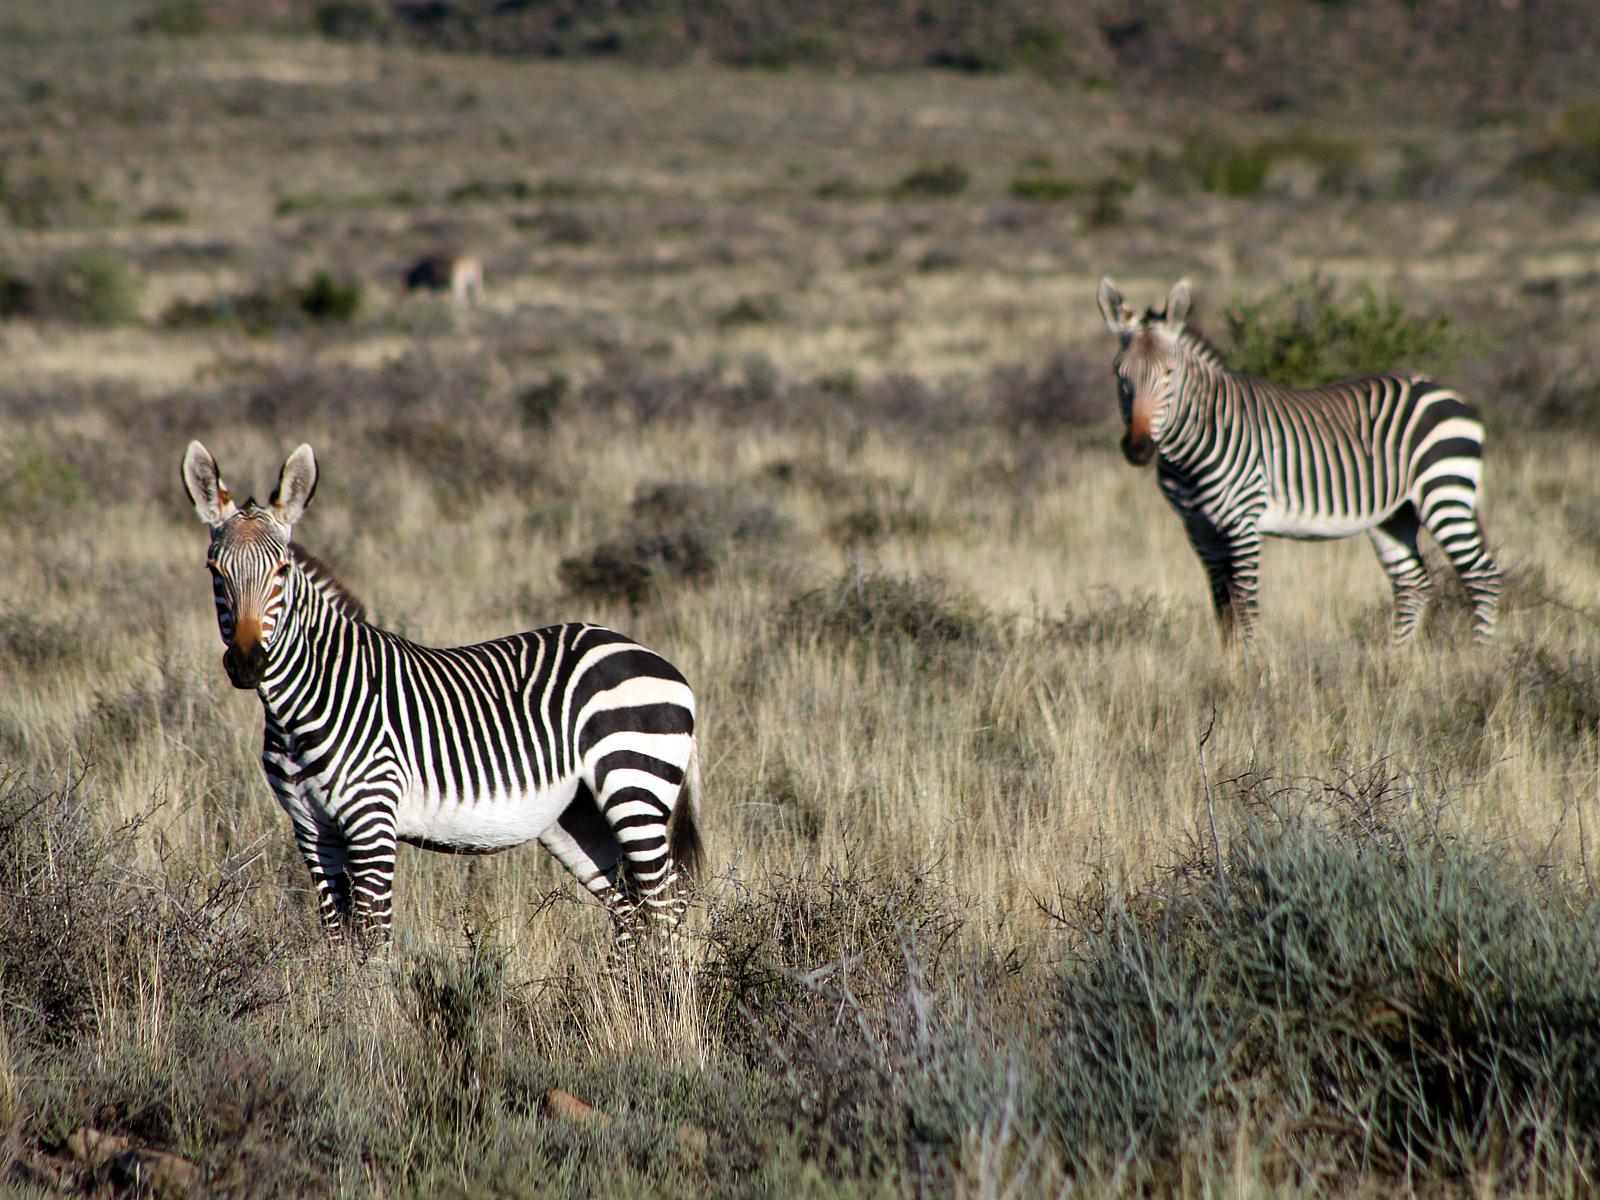 Visit National Park Mountain Zebra in a tailor-made tour | Evaneos